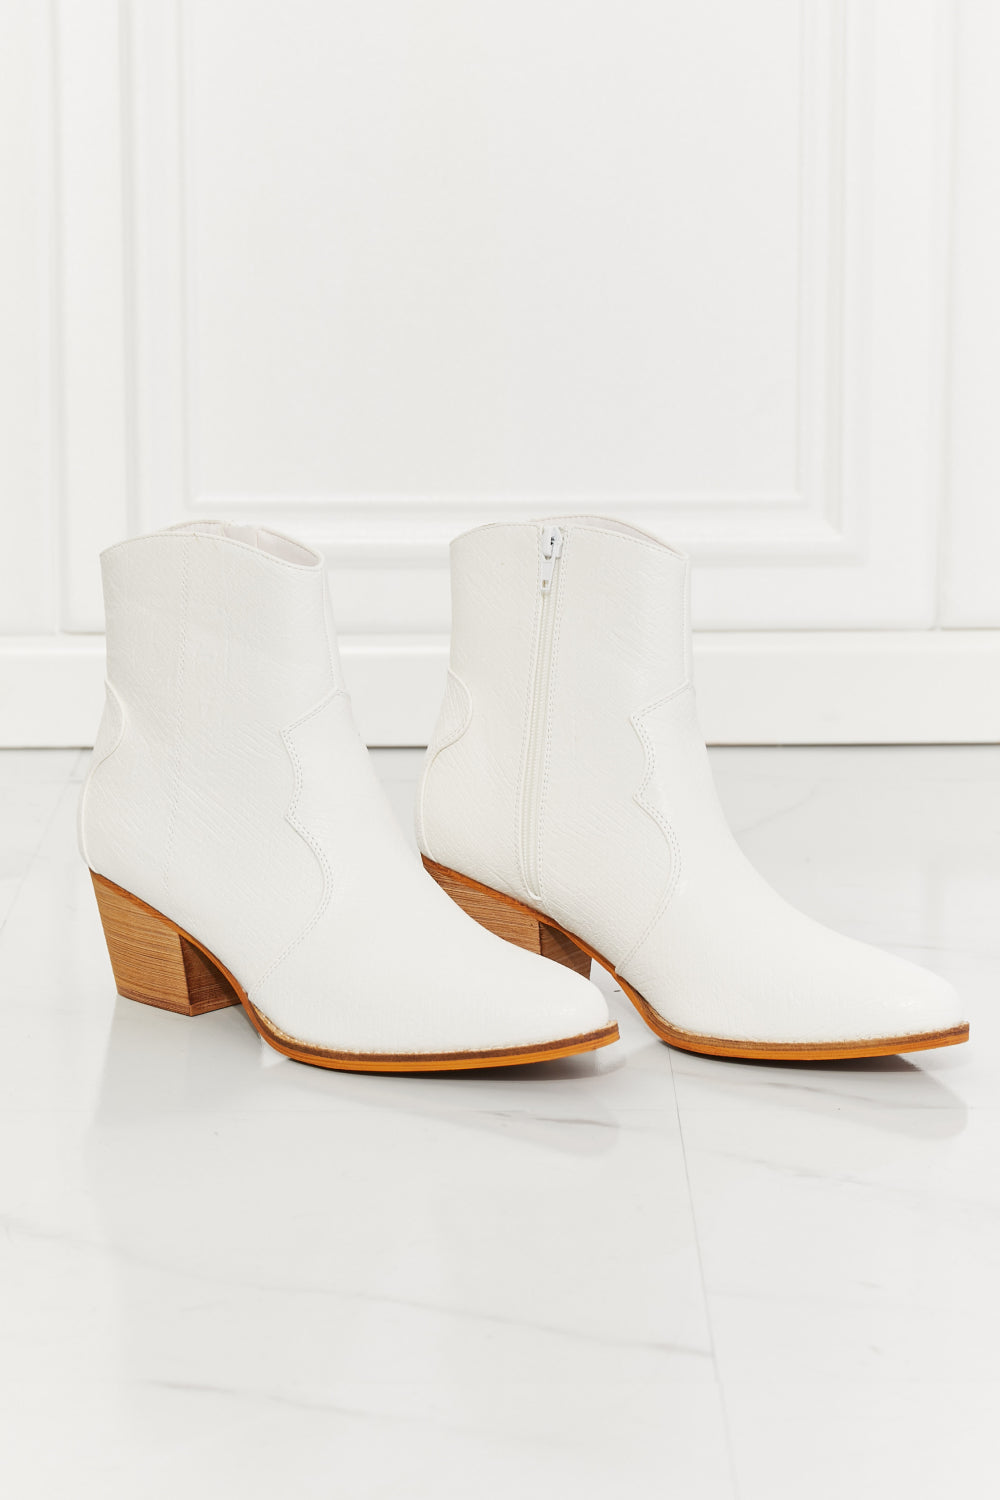 MMShoes Faux Leather Western Cowboy Style Ankle Bootie Boots Pointy Toe in White Watertower Town